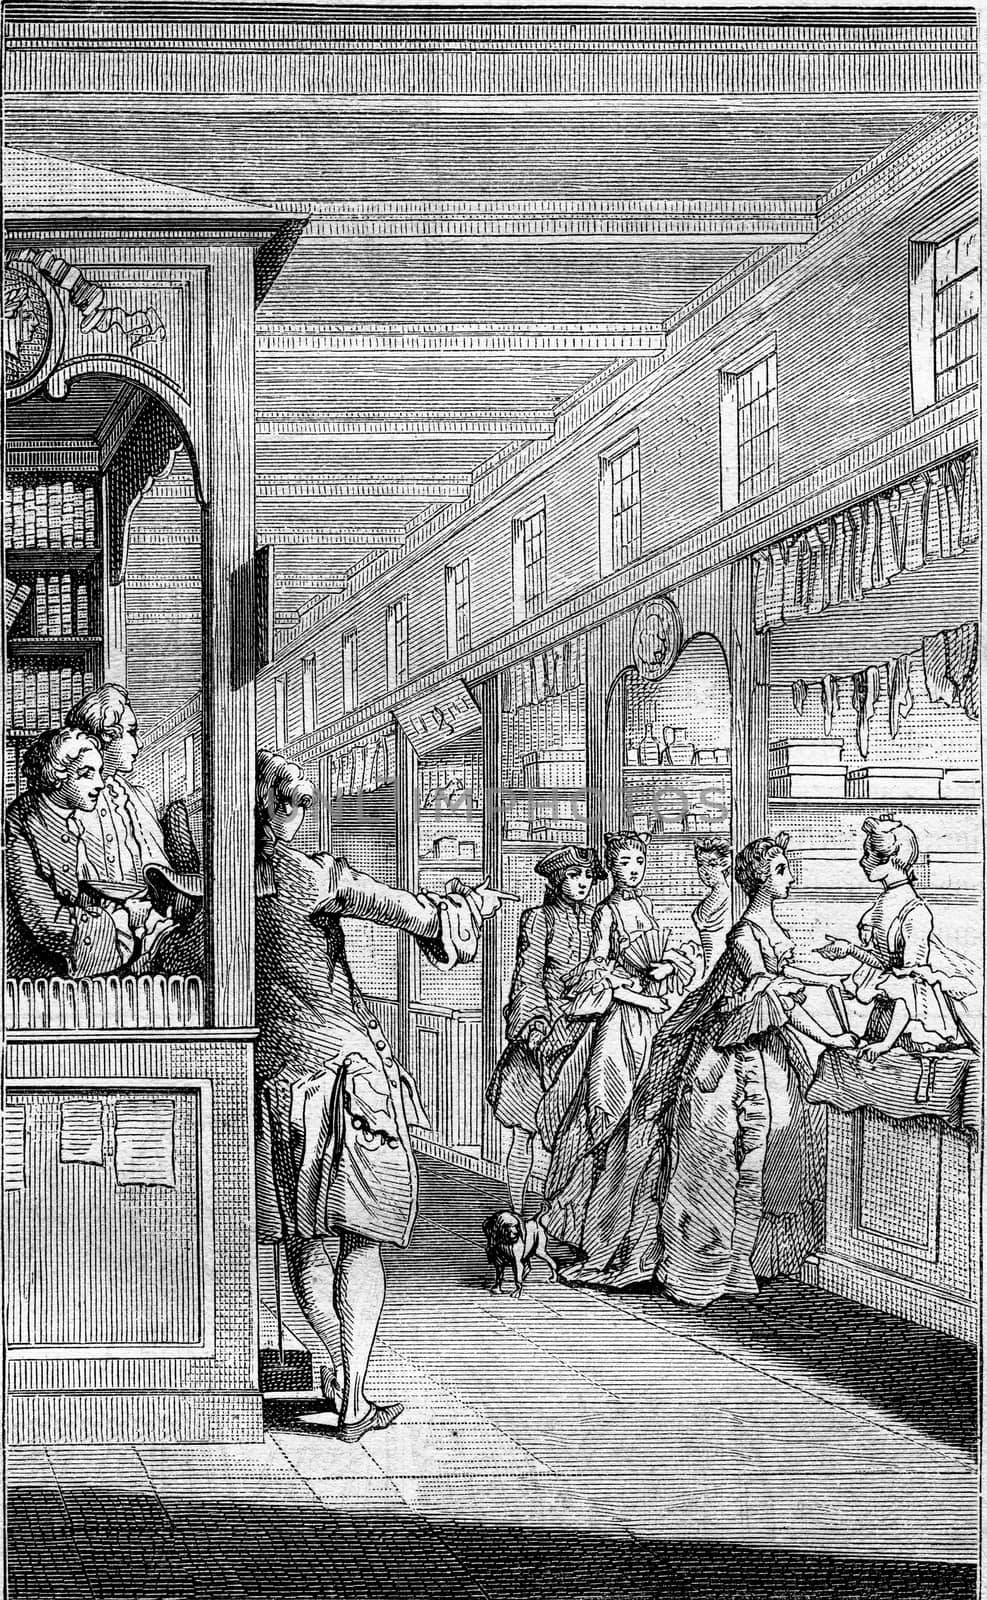 A Bookseller eighteenth century, vintage engraved illustration. Magasin Pittoresque 1882.
